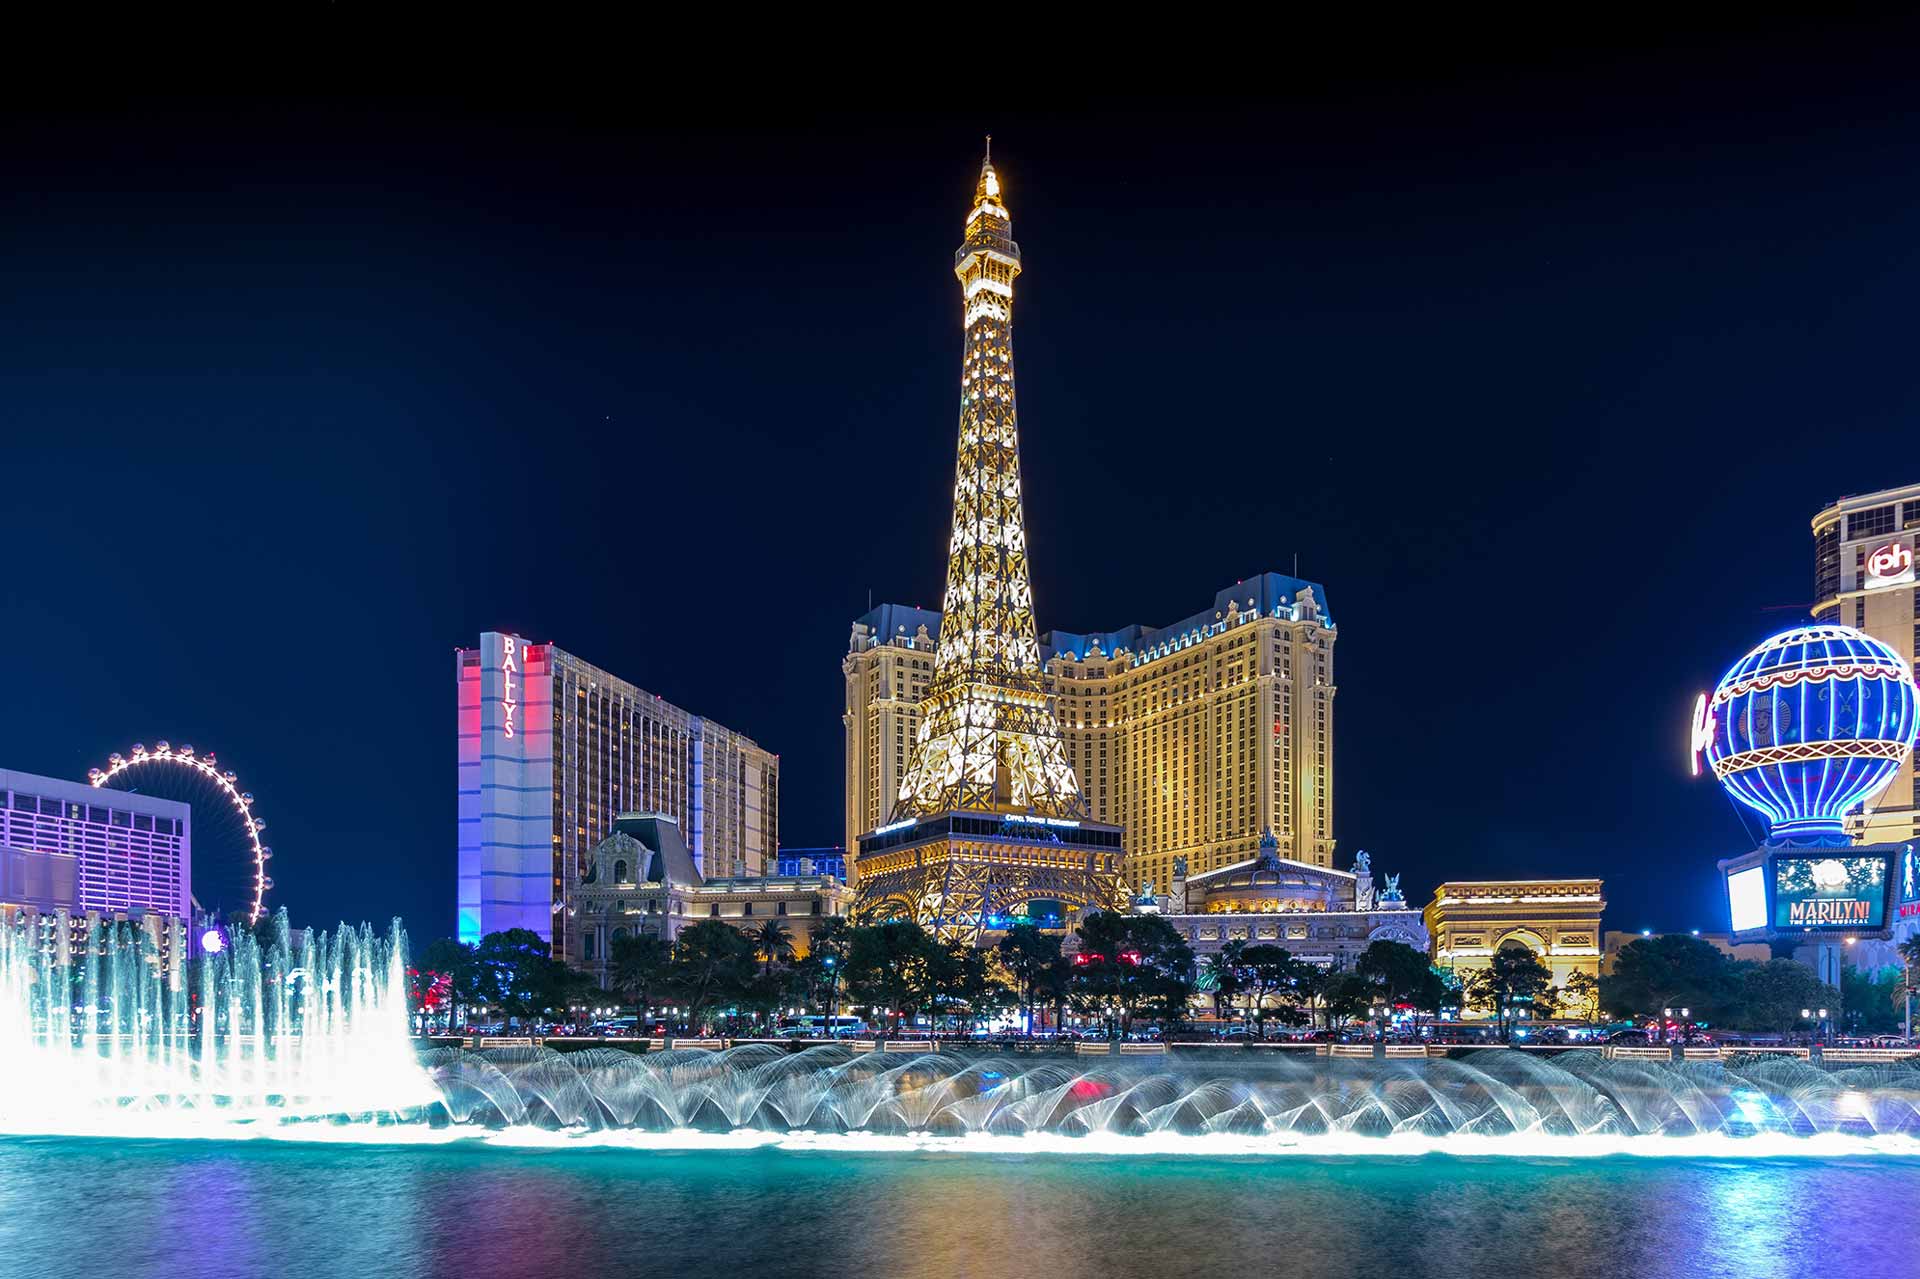 25 Best Things to Do in Vegas Right Now